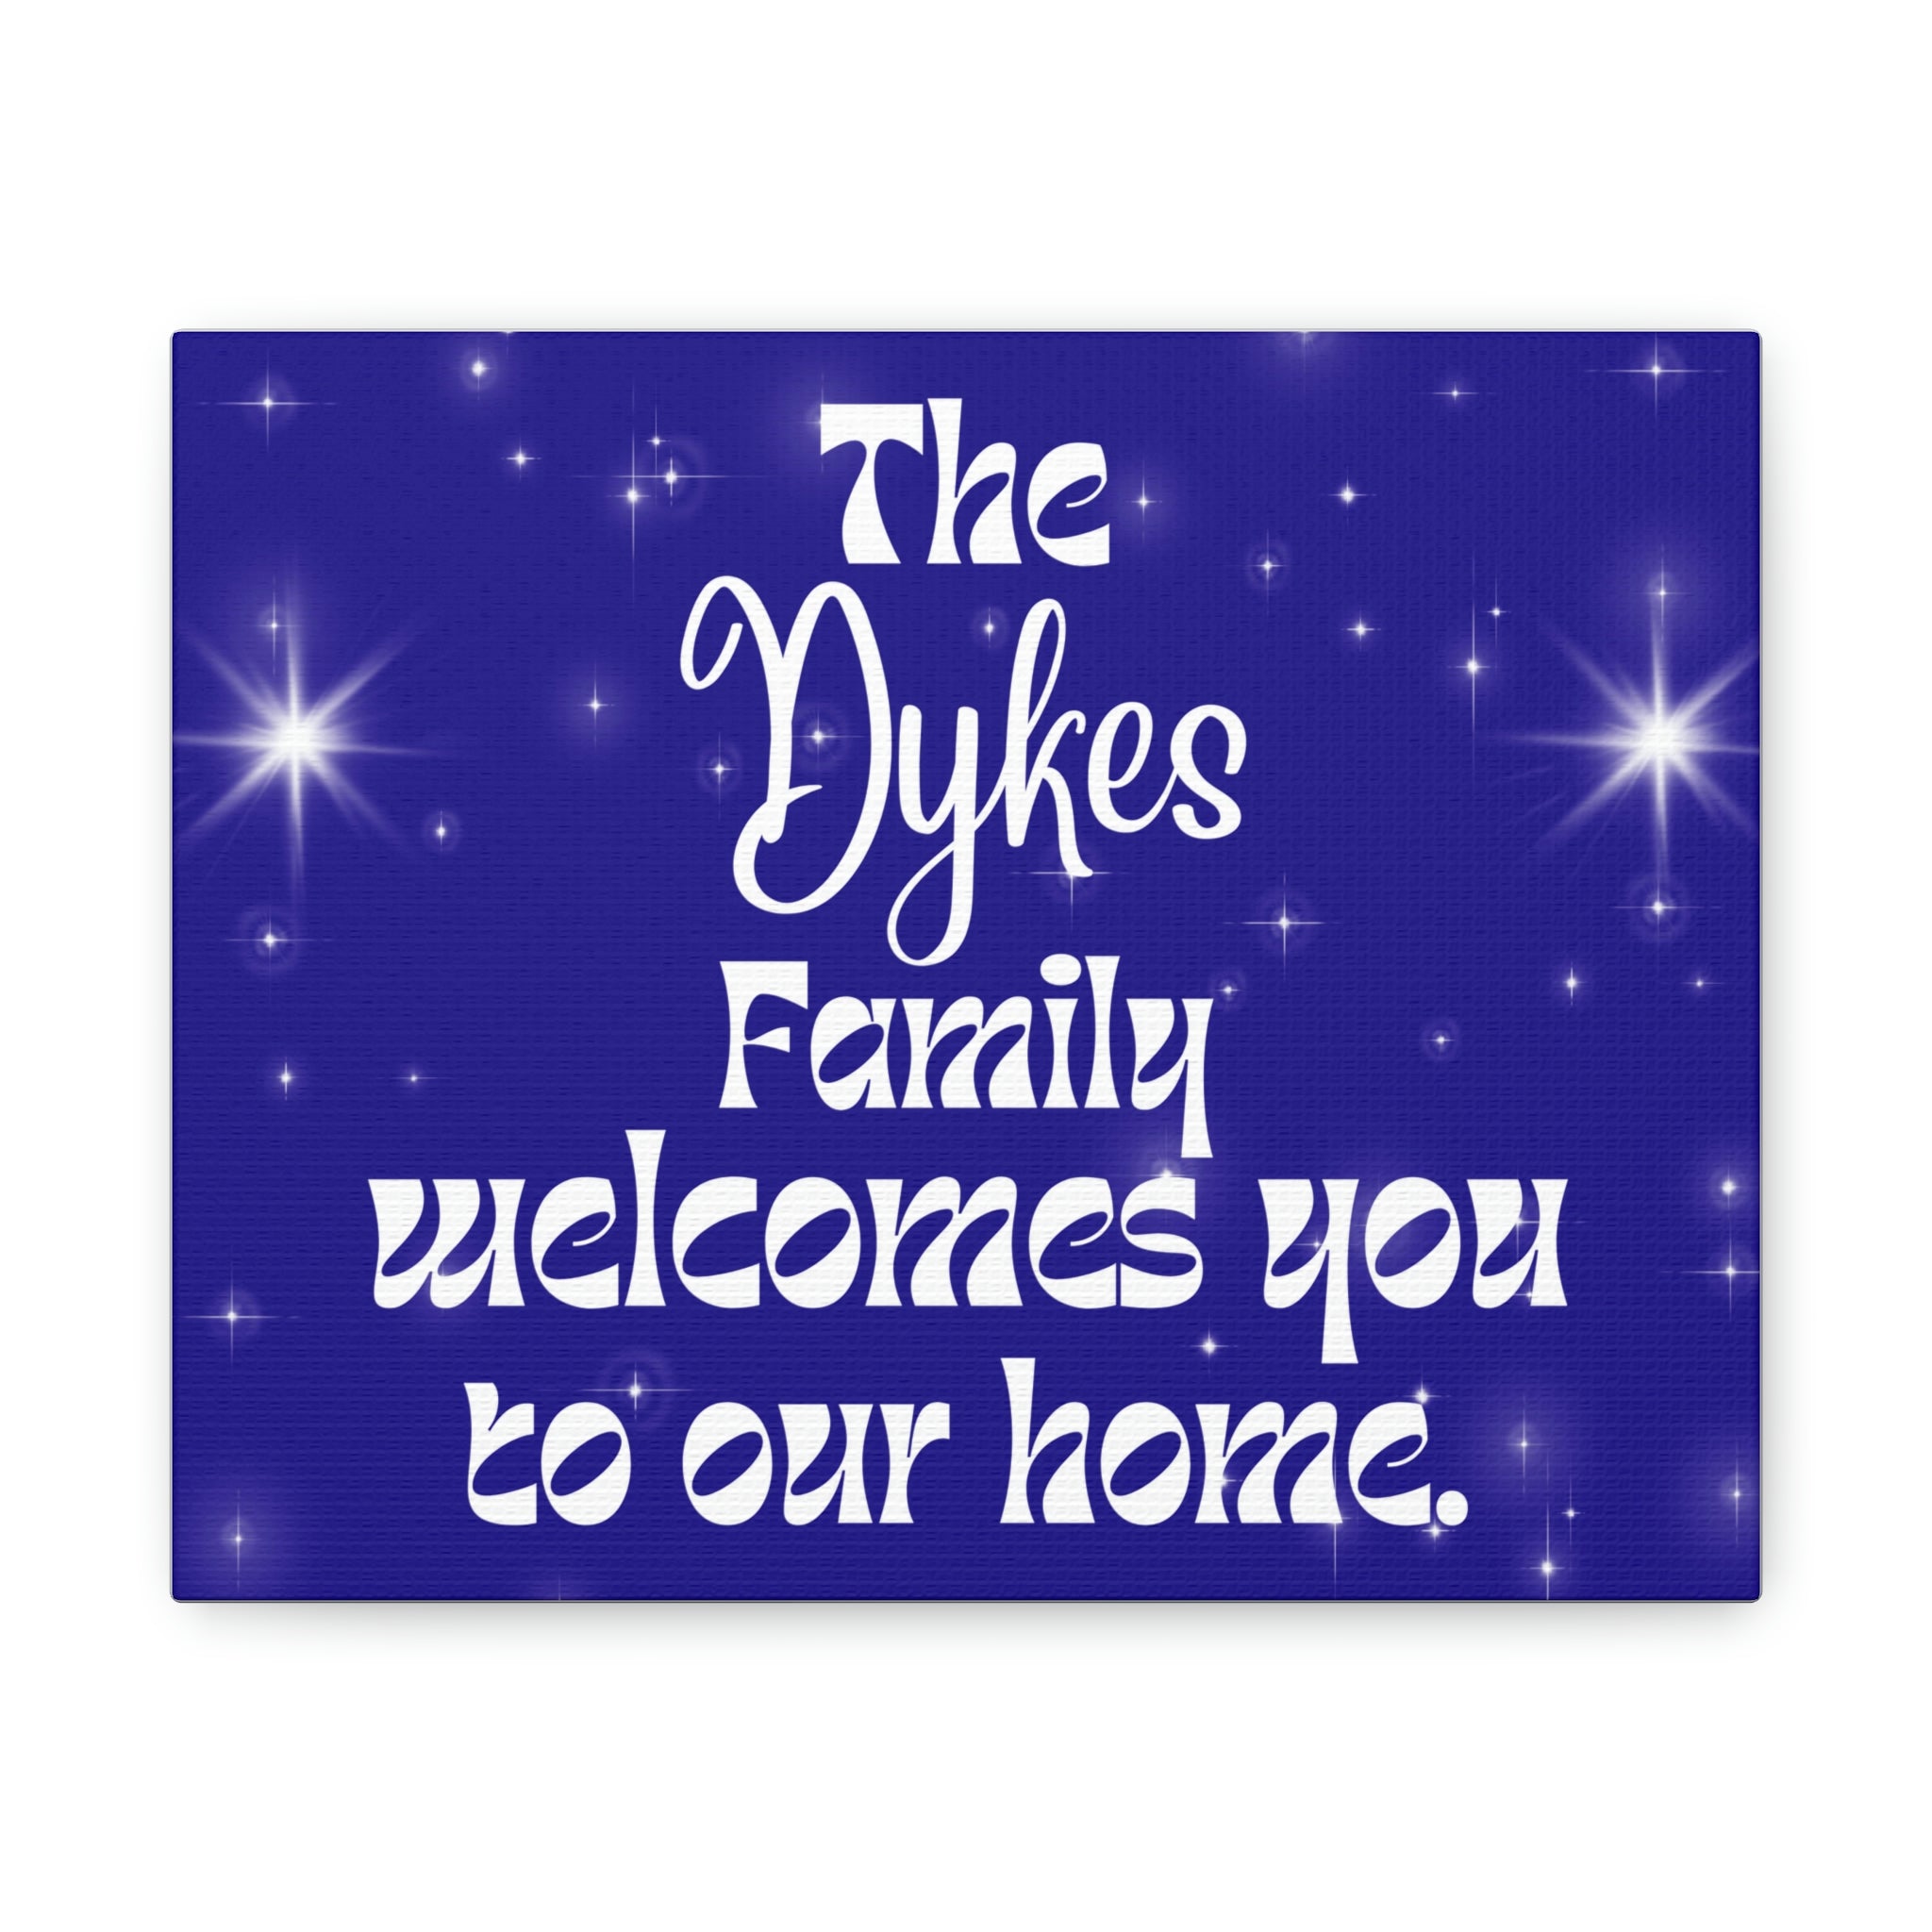 The "    "  Family welcome to our home. 10" x 8" Canvas Gallery Wraps (If you'd like another color or have different wording please just let me know)